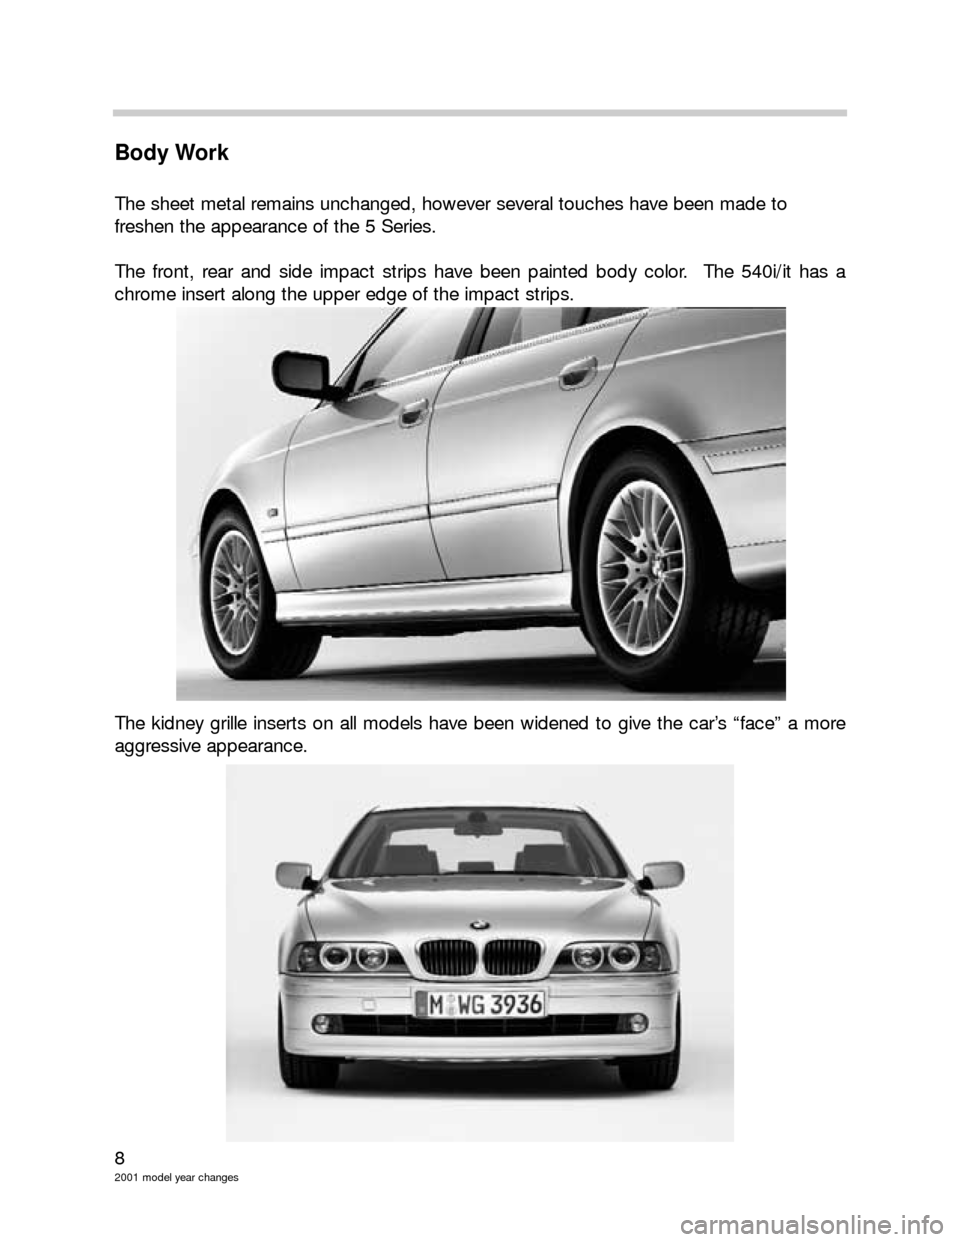 BMW 3 SERIES 2002 E46 Model Yar Changes 8
2001 model year changes
Body Work
The sheet metal remains unchanged, however several touches have been made to 
freshen the appearance of the 5 Series.
The front, rear and side impact strips have be